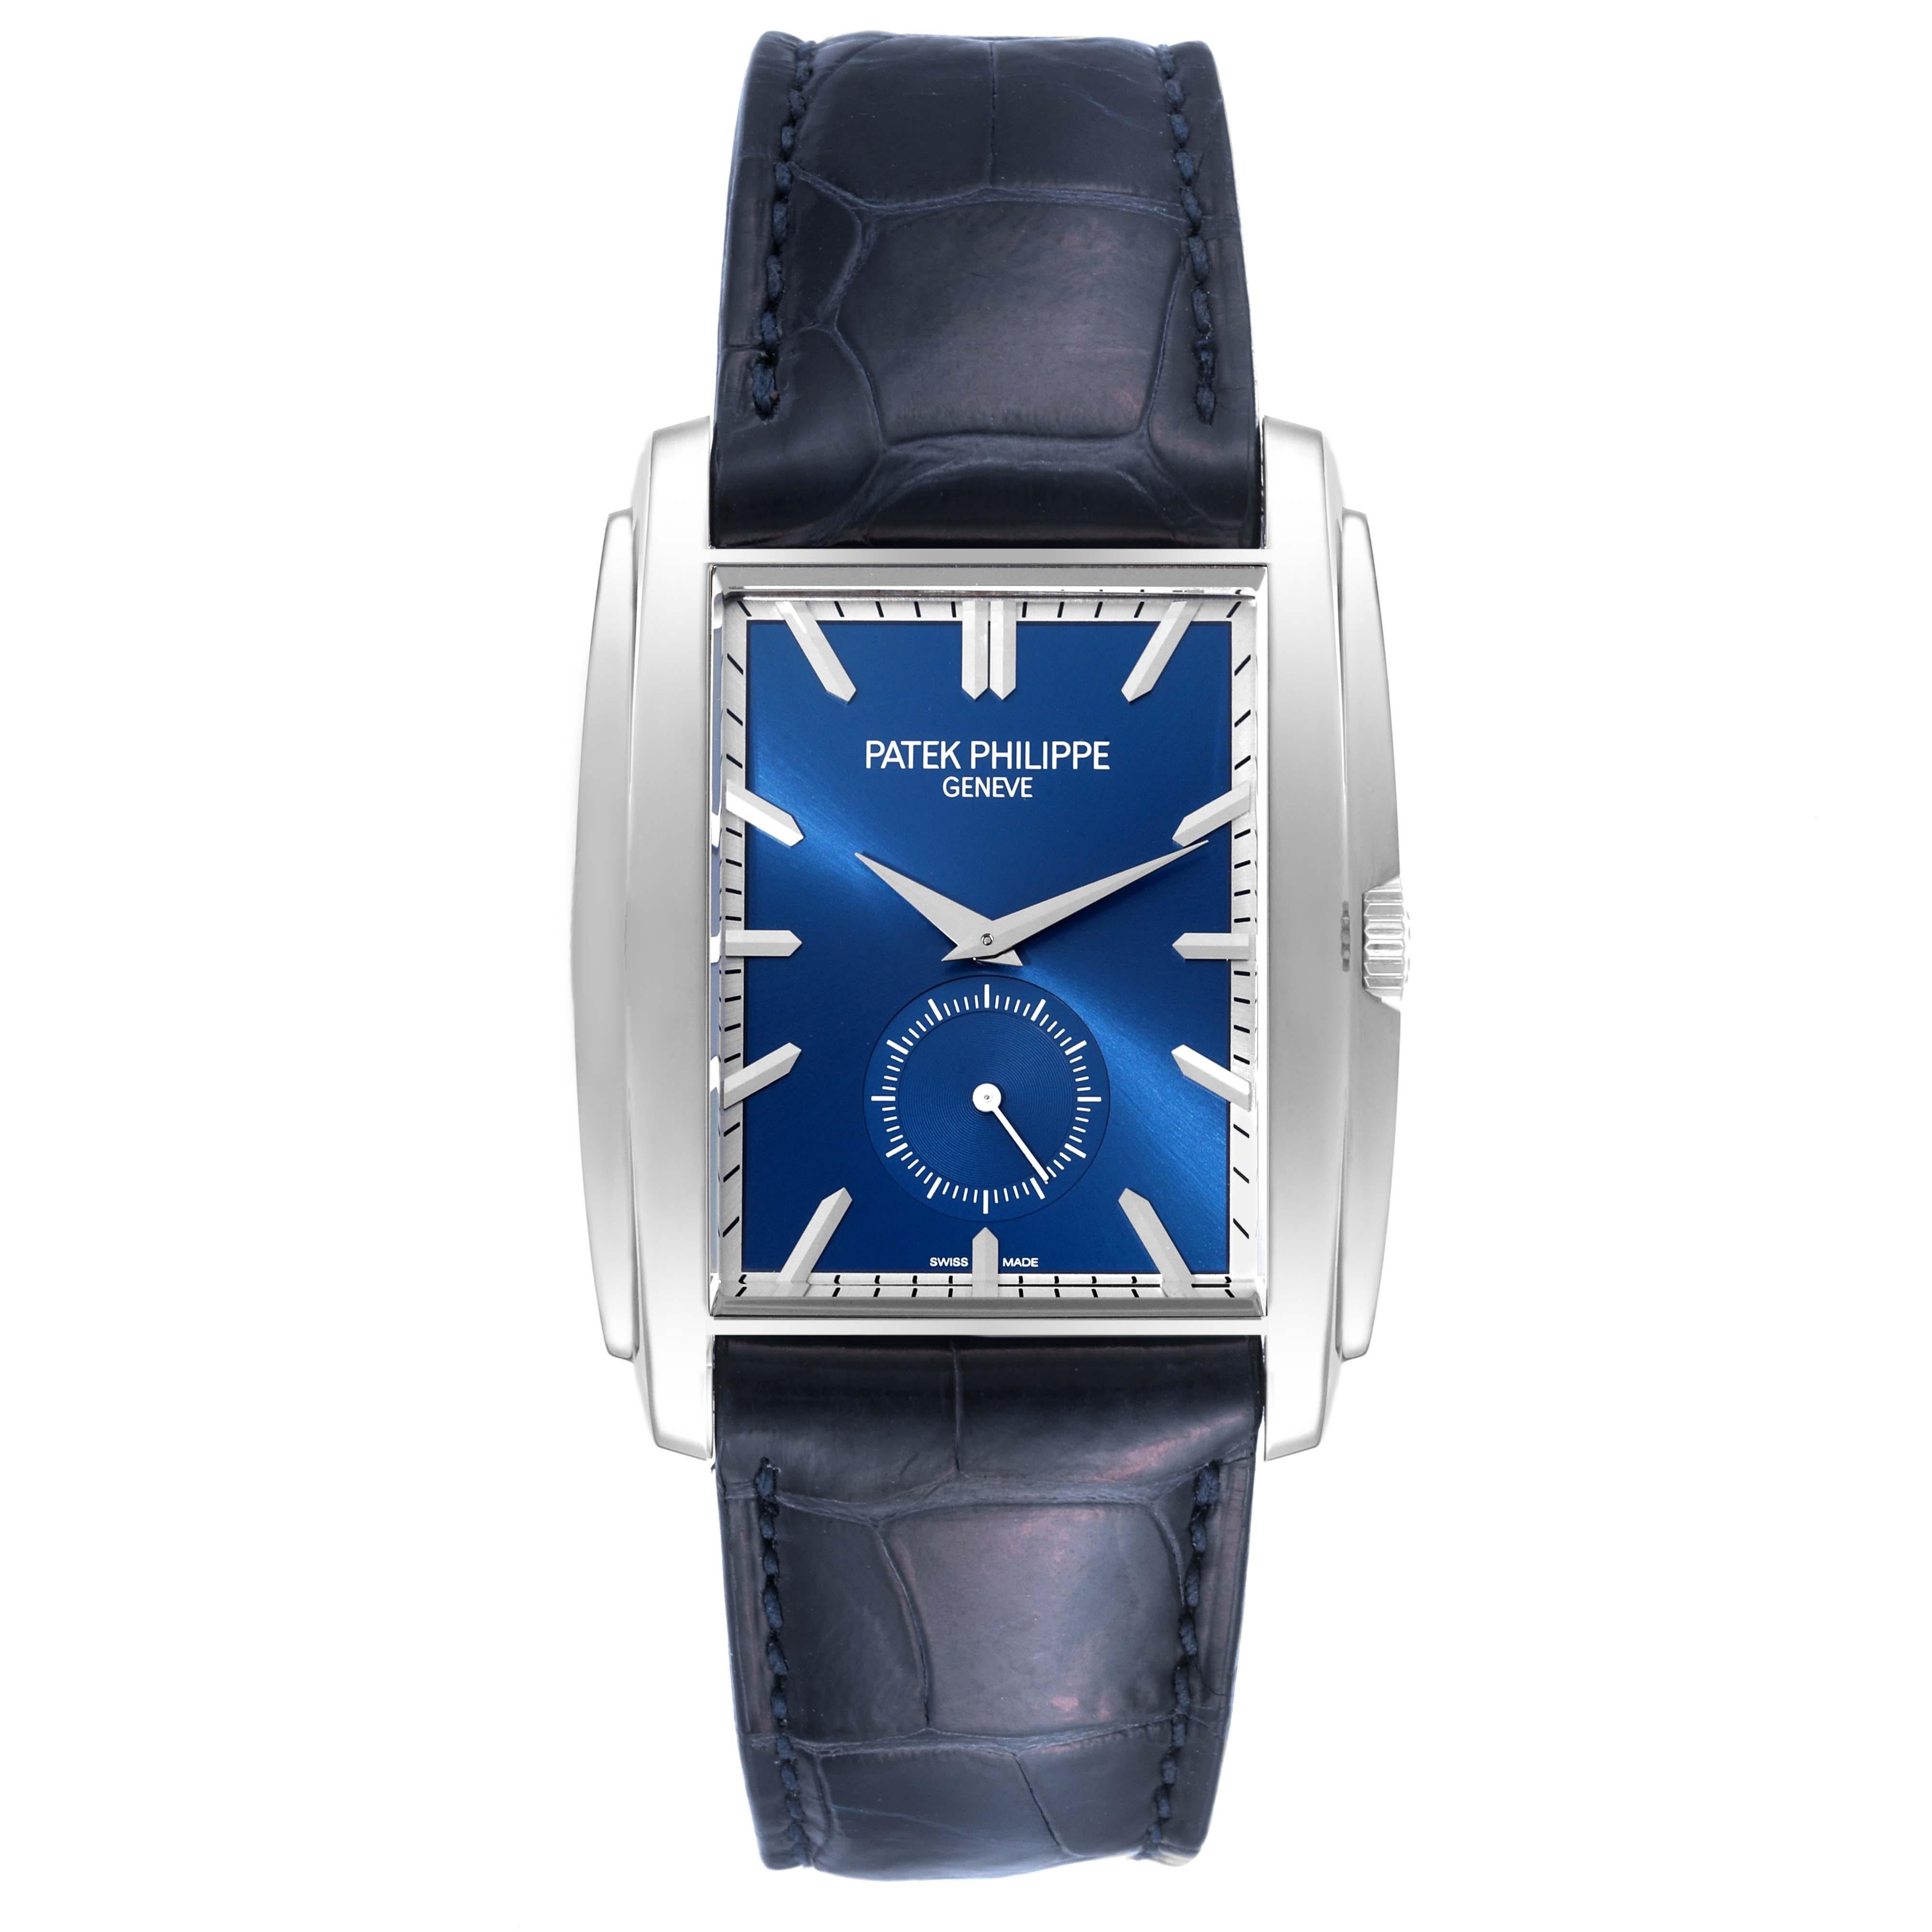 Patek Philippe Gondolo Small Seconds White Gold Blue Dial Mens Watch 5124 Papers. Manual winding movement. 18K white gold rectangular case 43 mm x 33.4 mm. Transparent exhibition sapphire crystal caseback. . Scratch resistant sapphire crystal. Blue